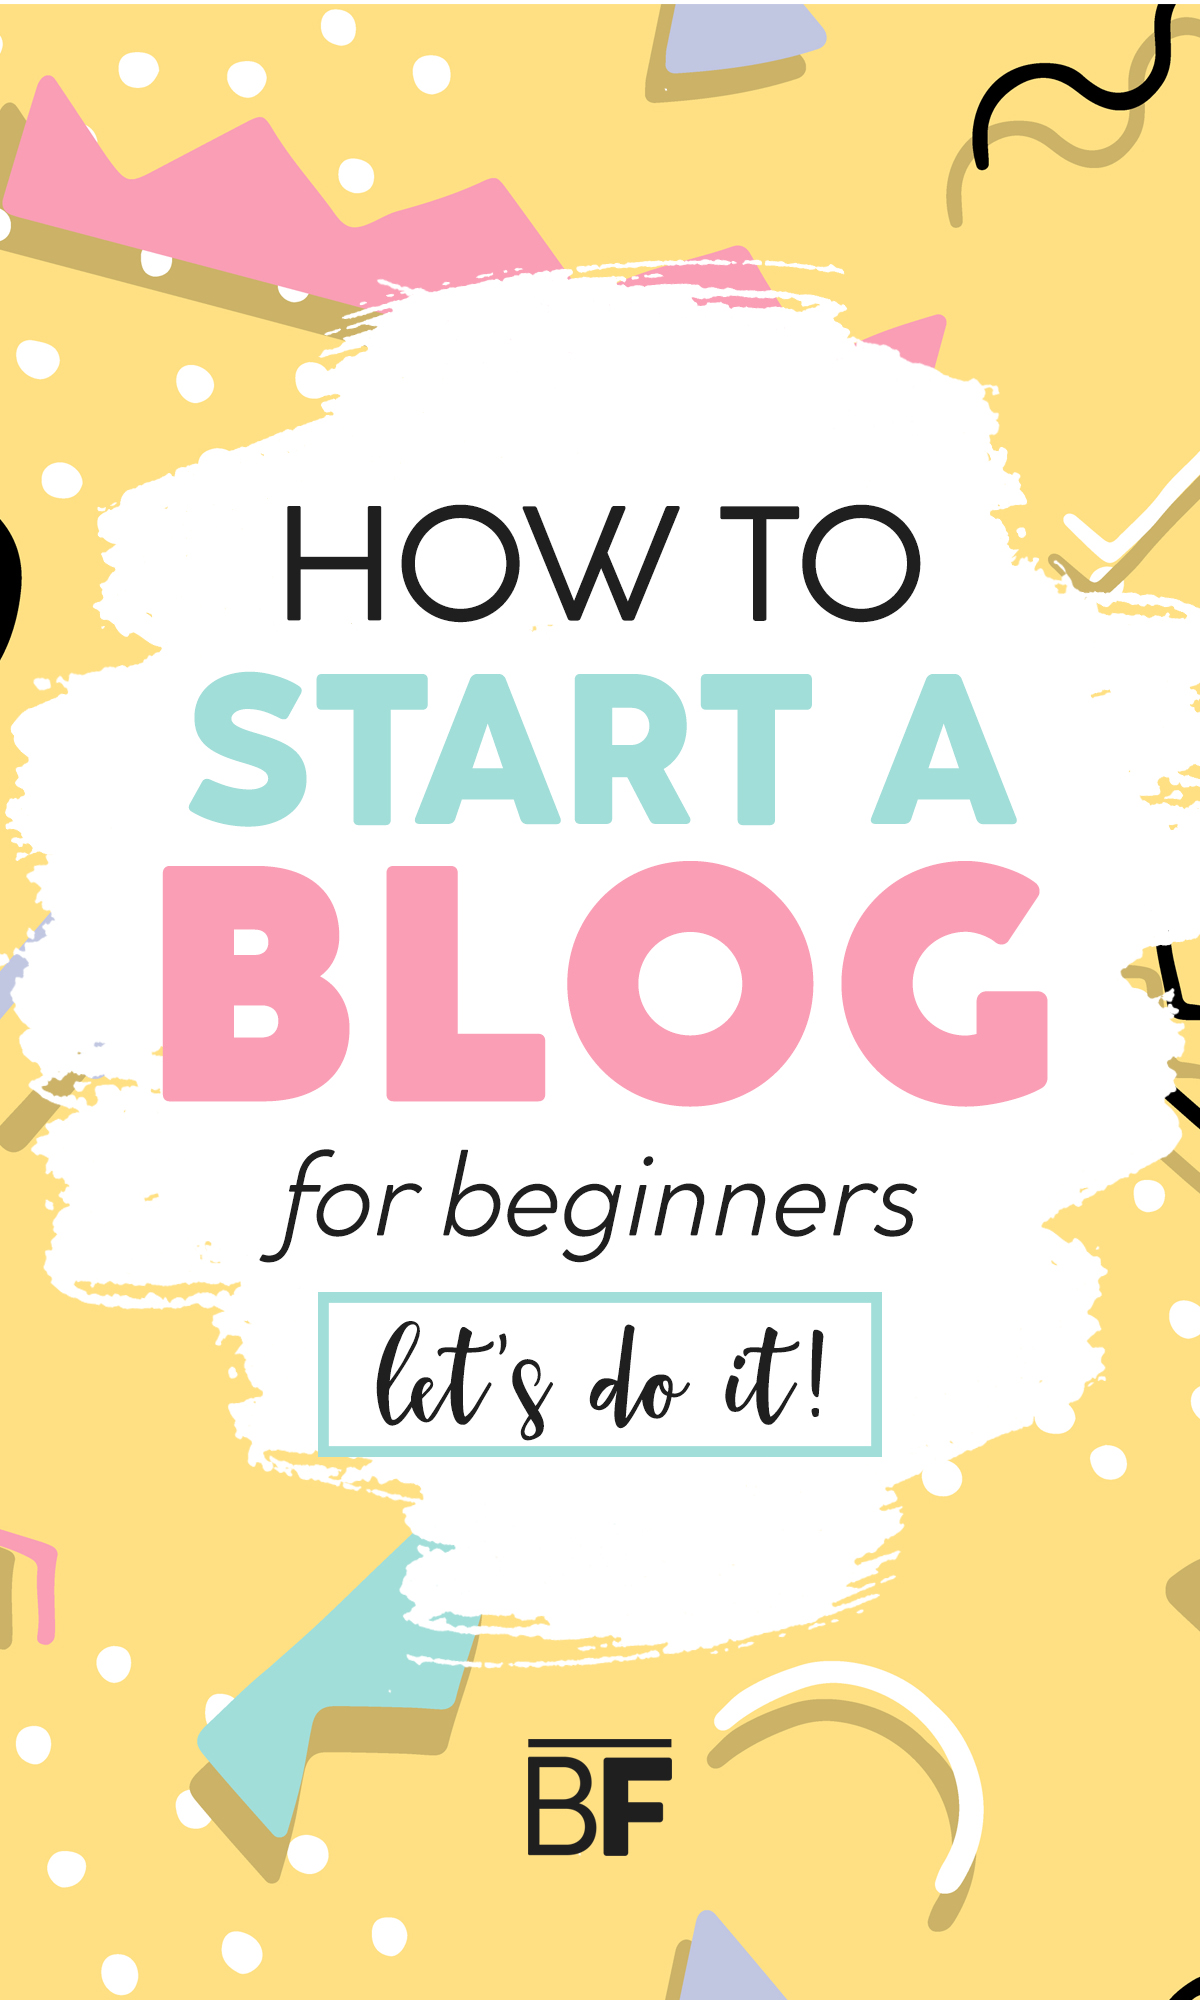 Ready to start writing about what you love? Learn how to start a blog in 6 easy steps to be on your way toward earning passive income online! #howtostartablog #makemoneyblogging 